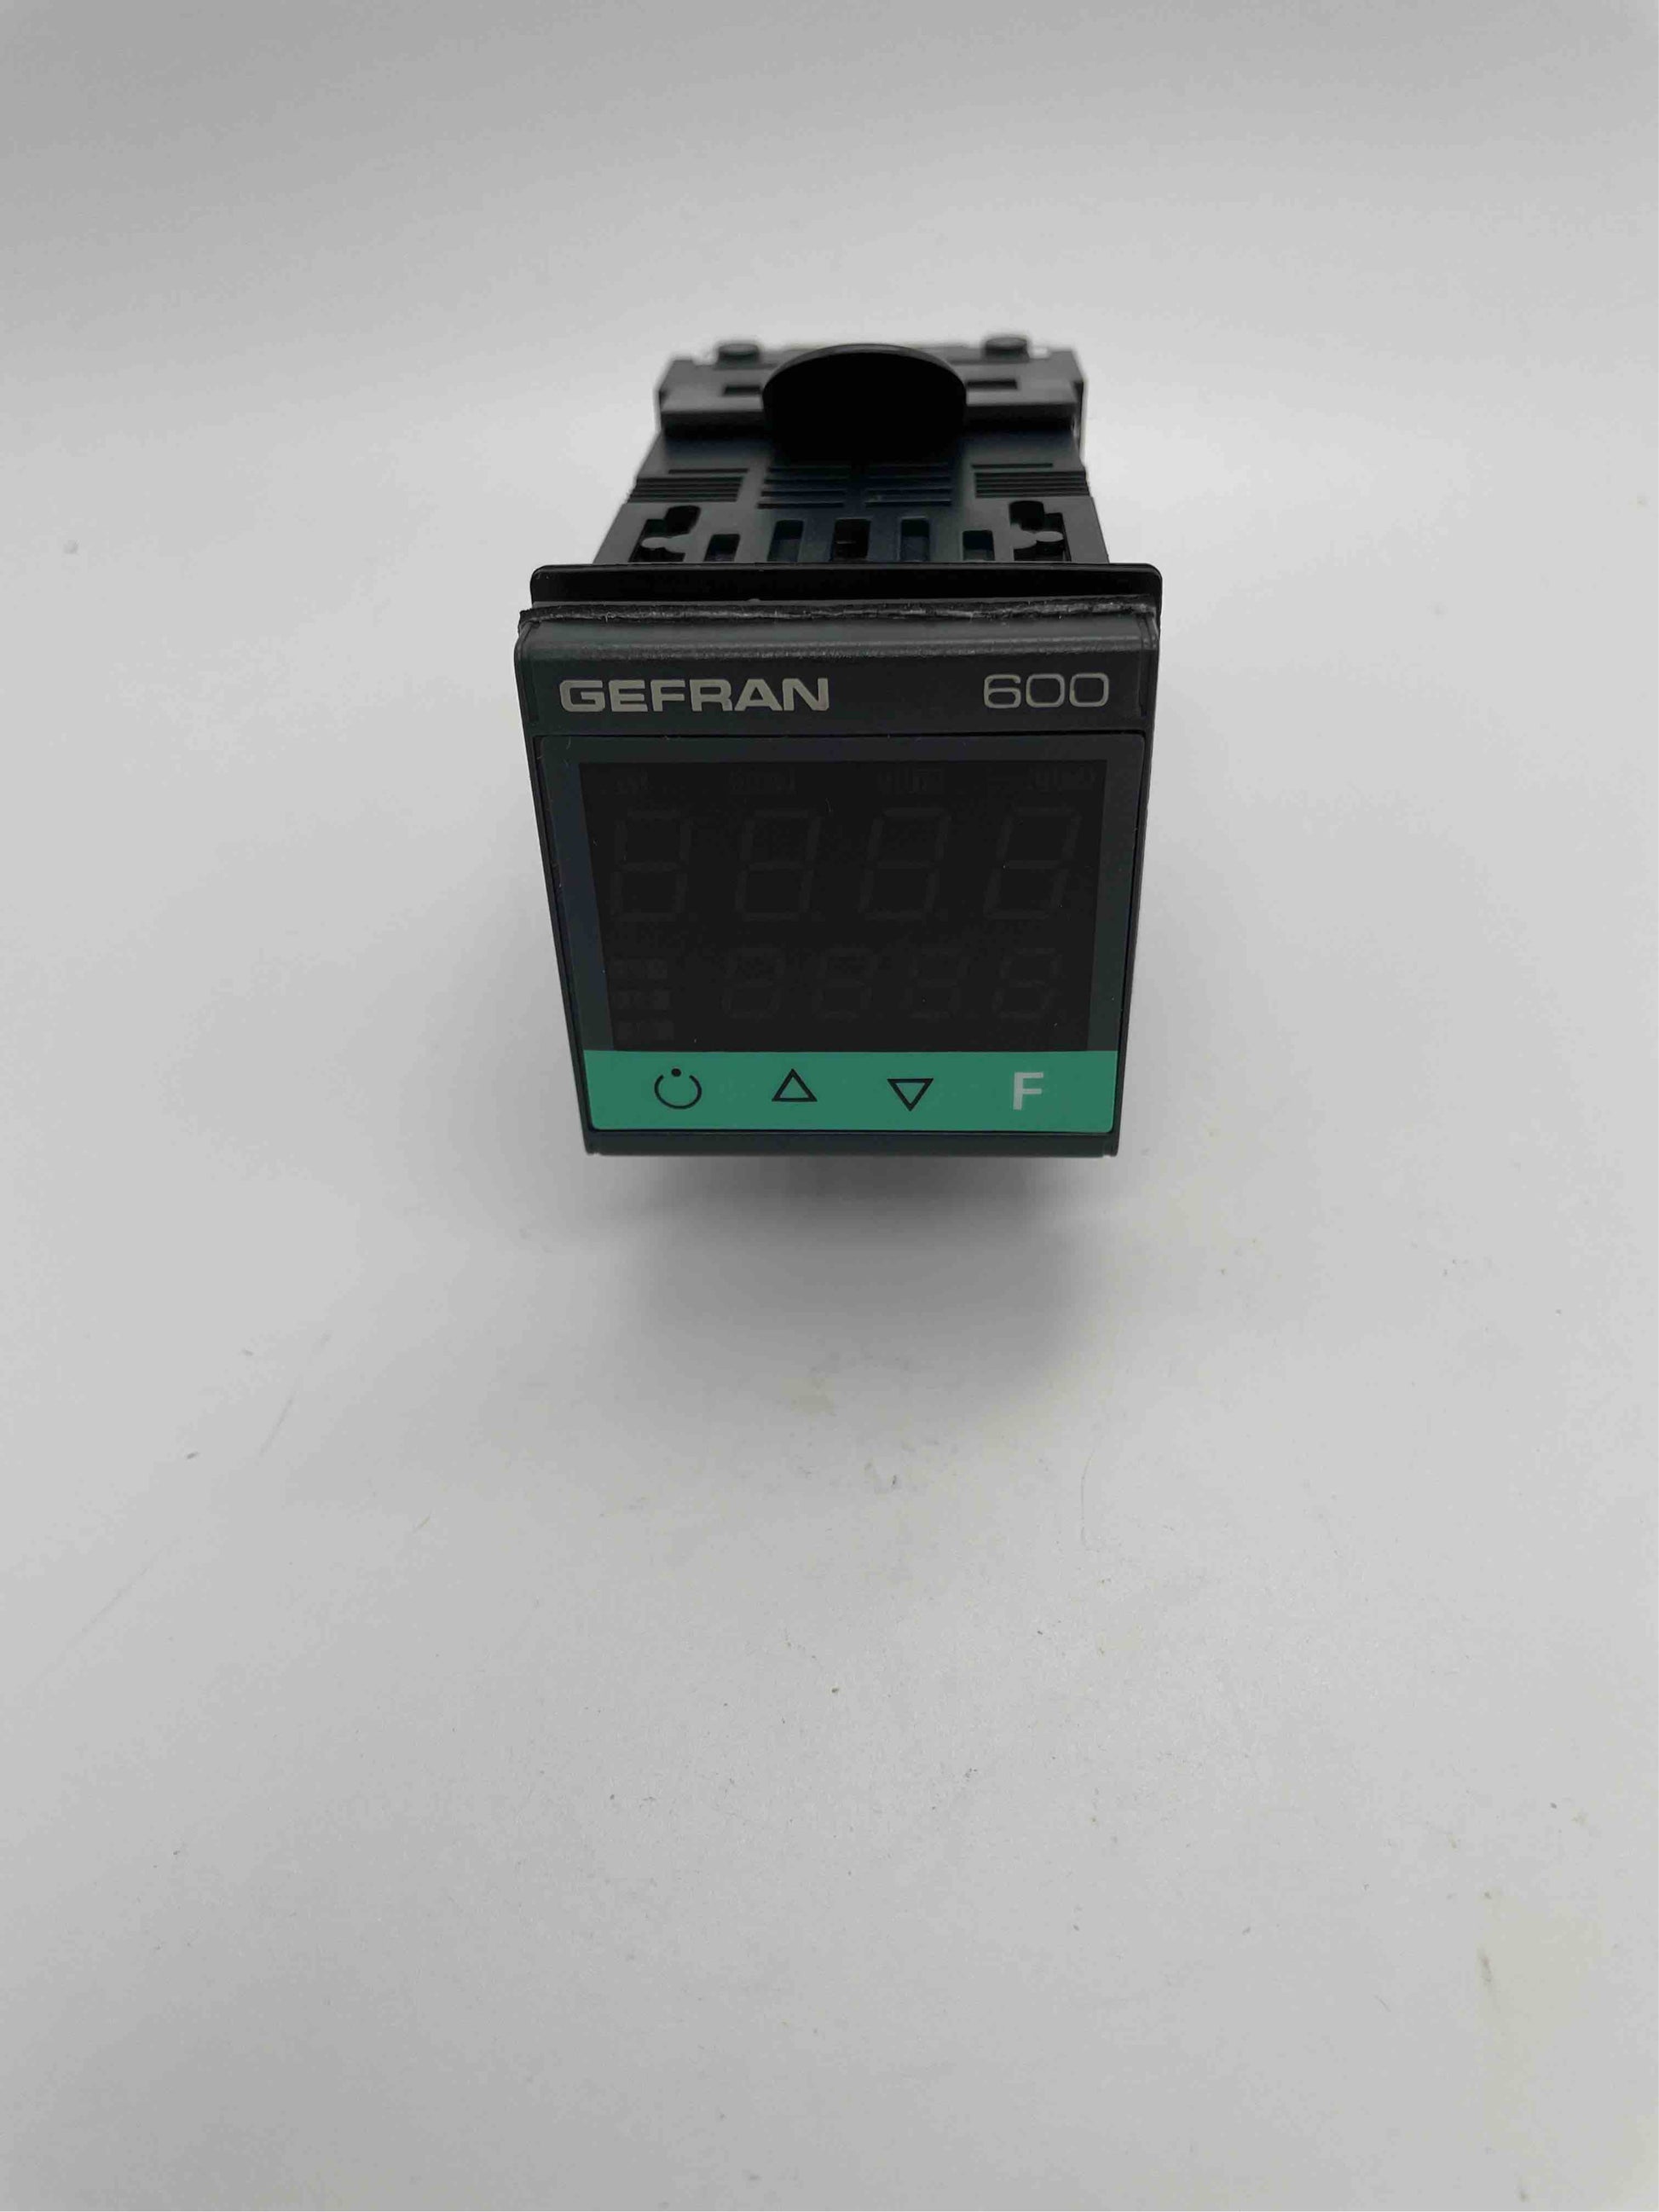 EJ-0183. 

Temp Controller
If in stock No PL needed.  Shop to program 